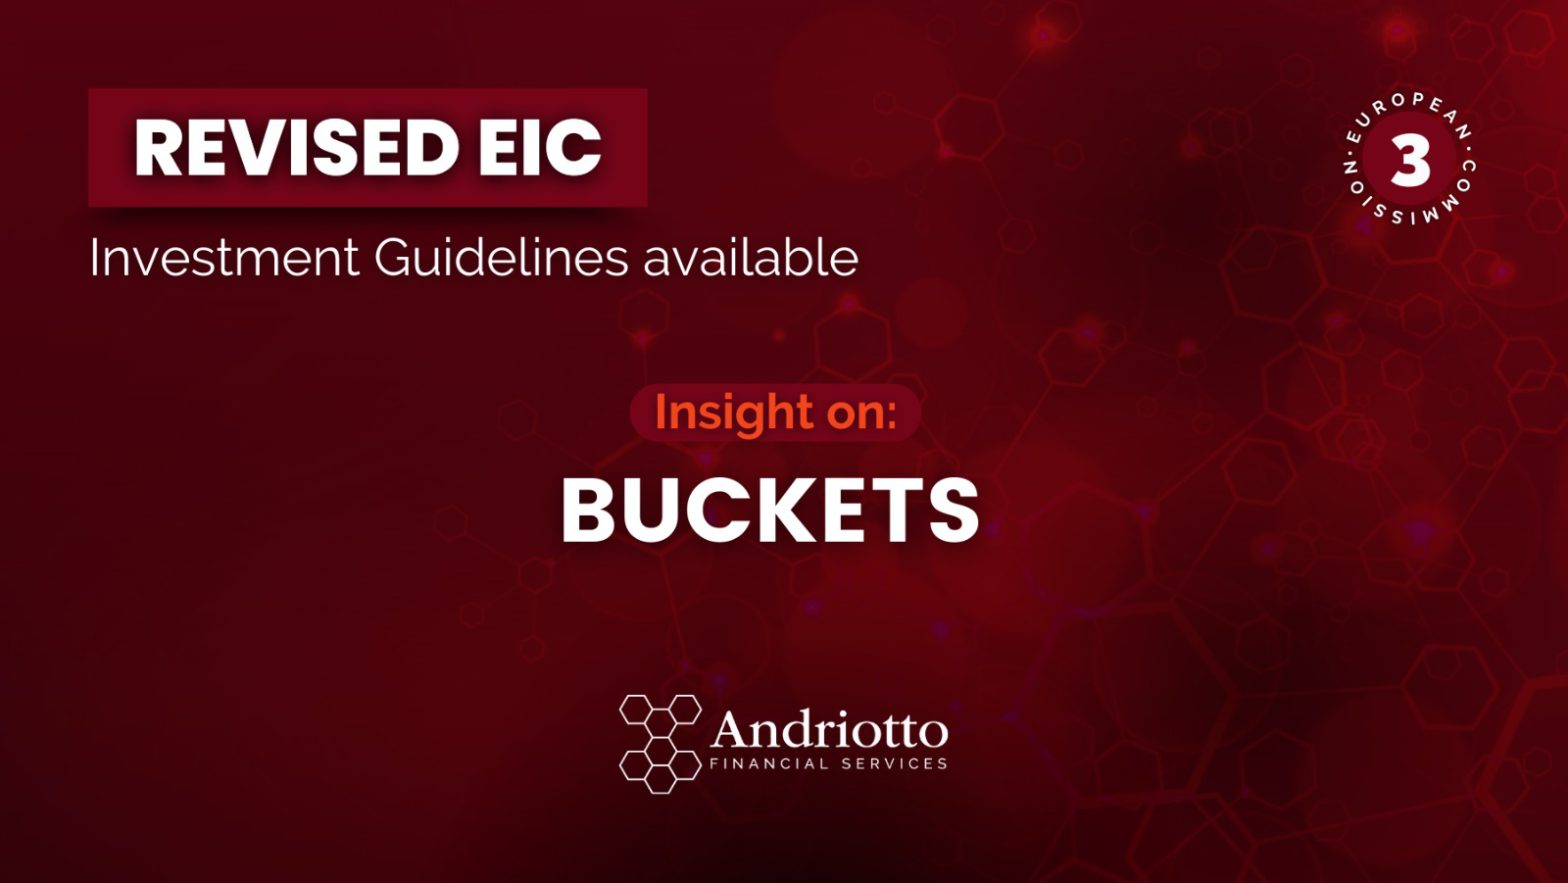 Red background with the title "Revised EIC Investment Guidelines available. Insight on buckets (investment scenarios)".